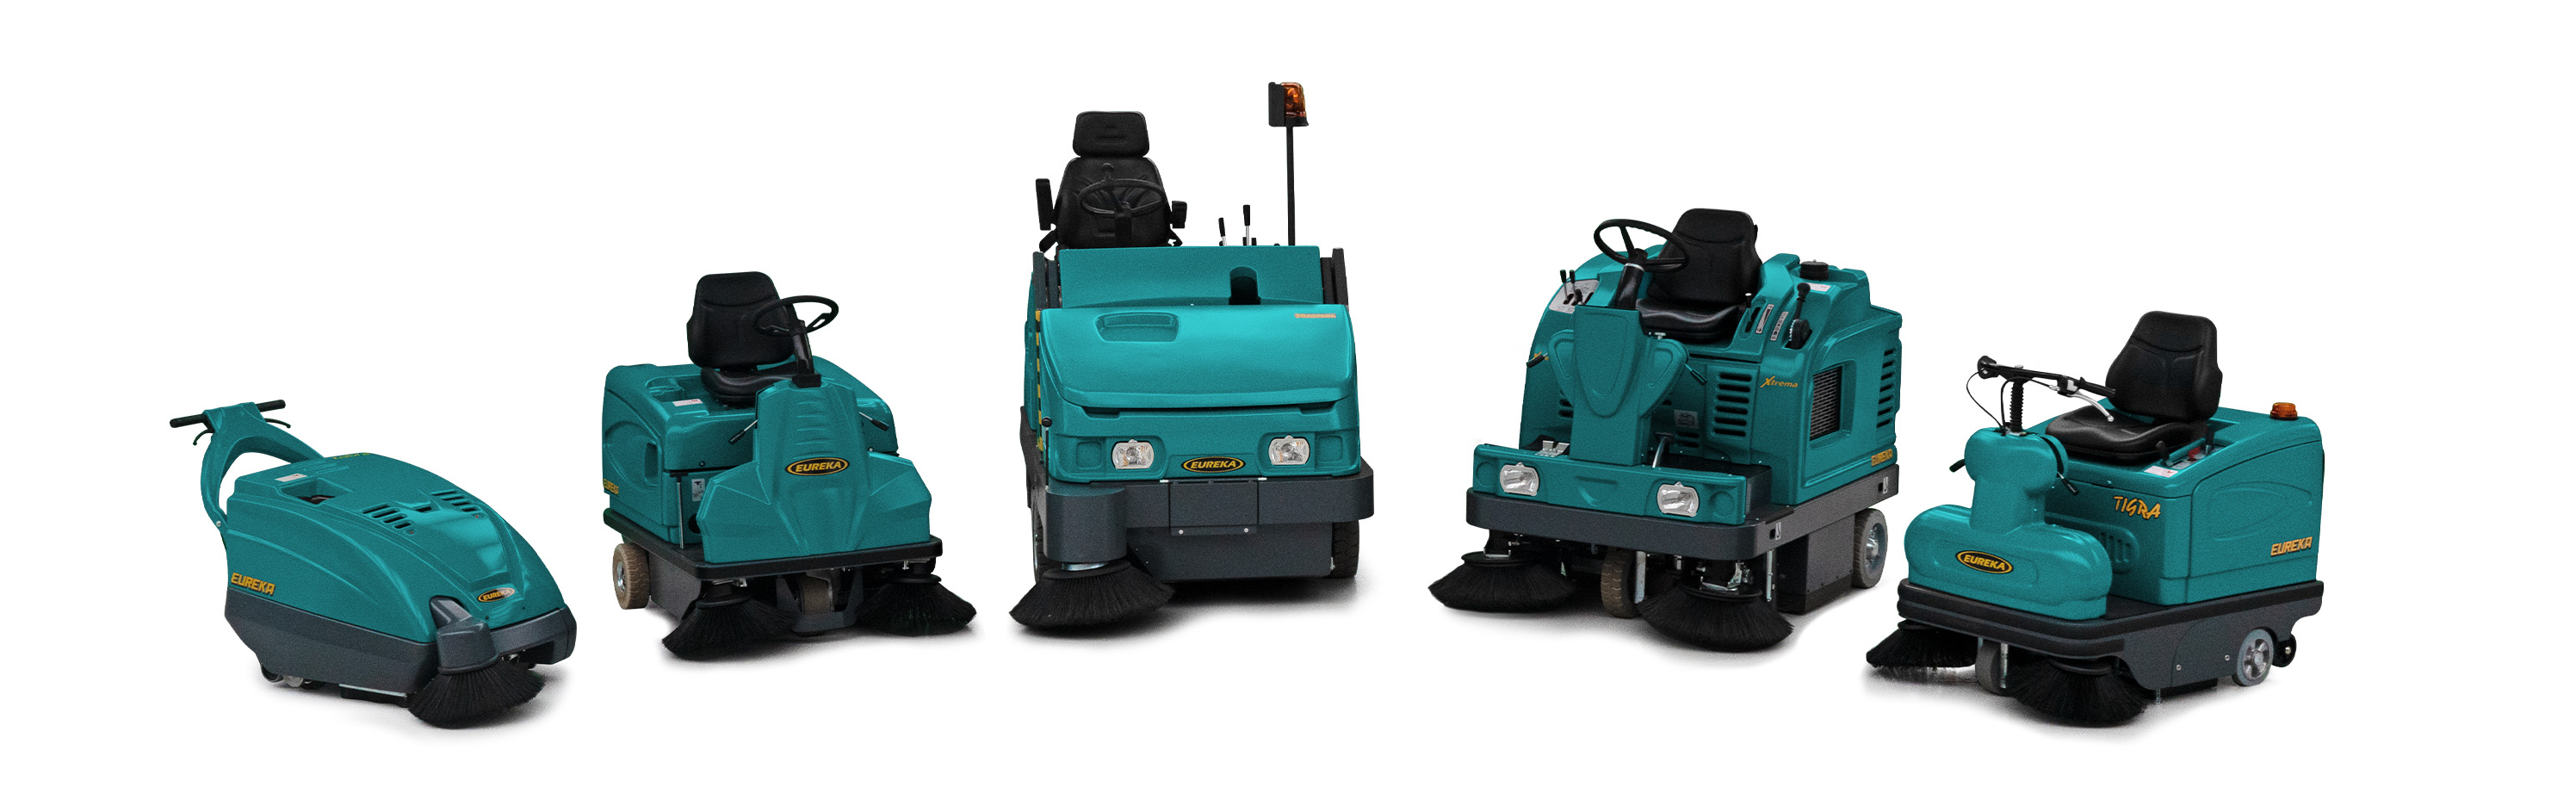 Eureka electric sweepers are emission free cleaning machines